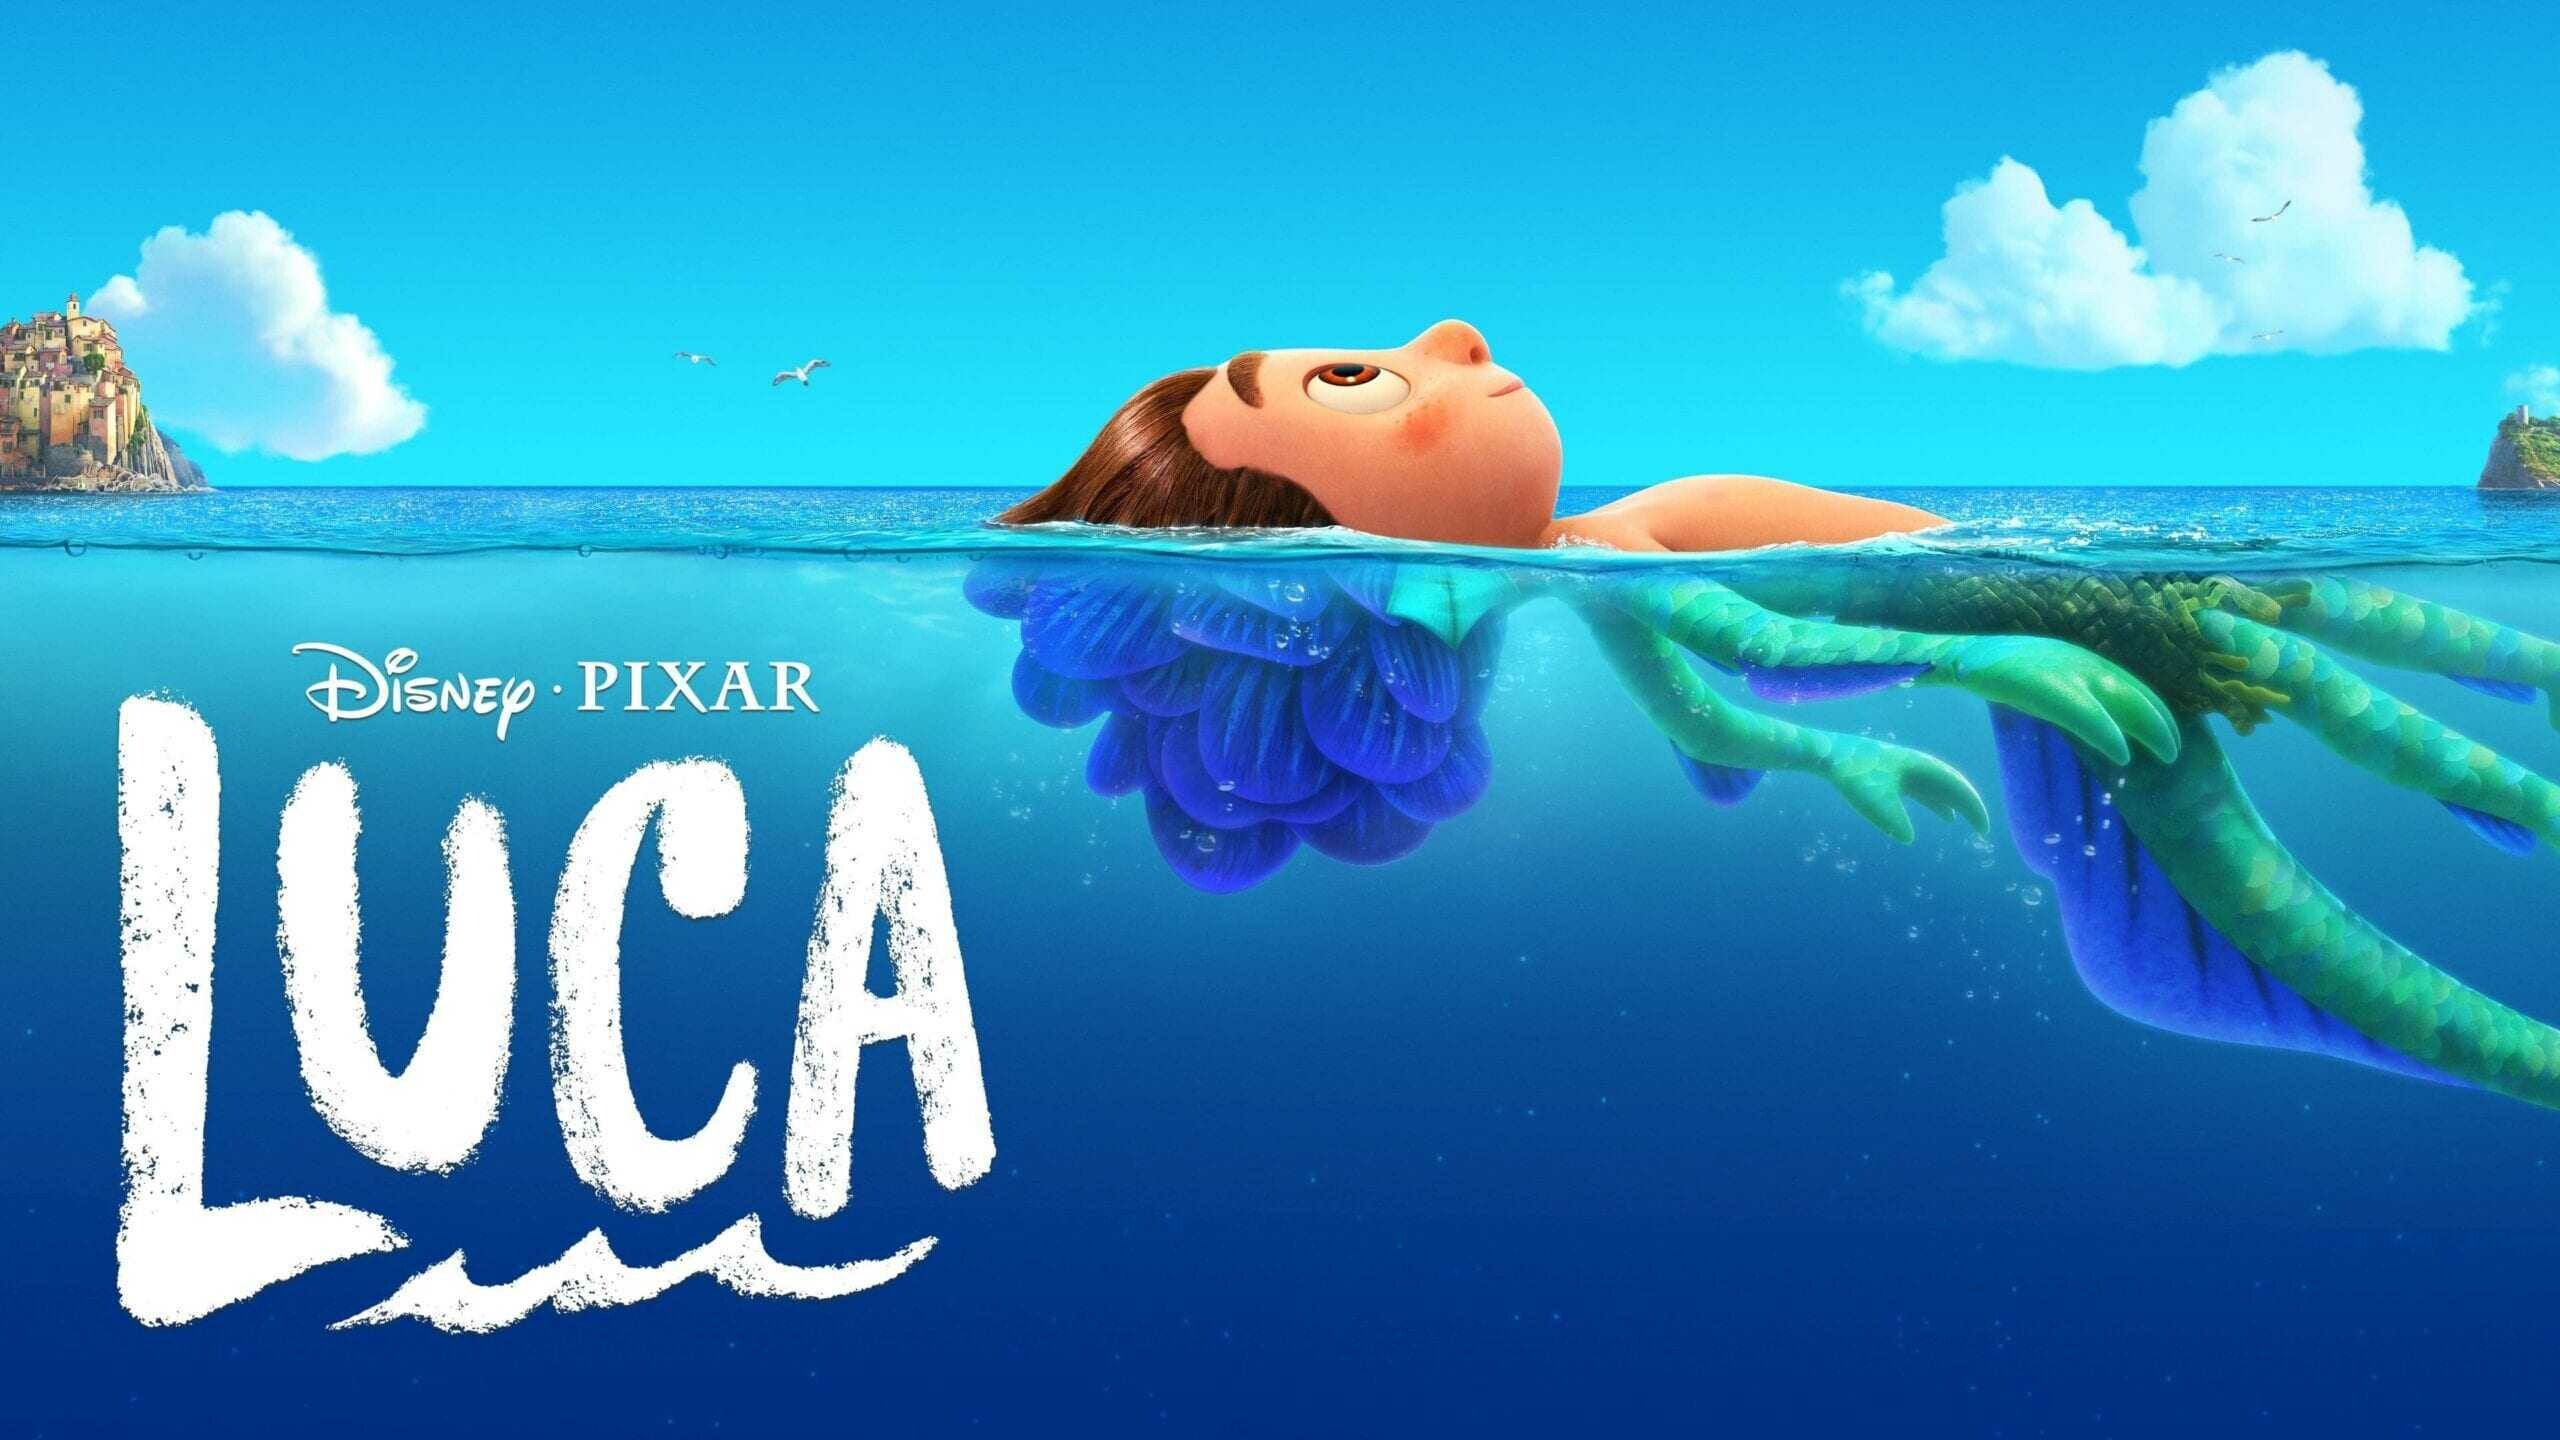 Luca: The film centers on a young sea monster boy with the ability to assume human form while on land. 2560x1440 HD Background.